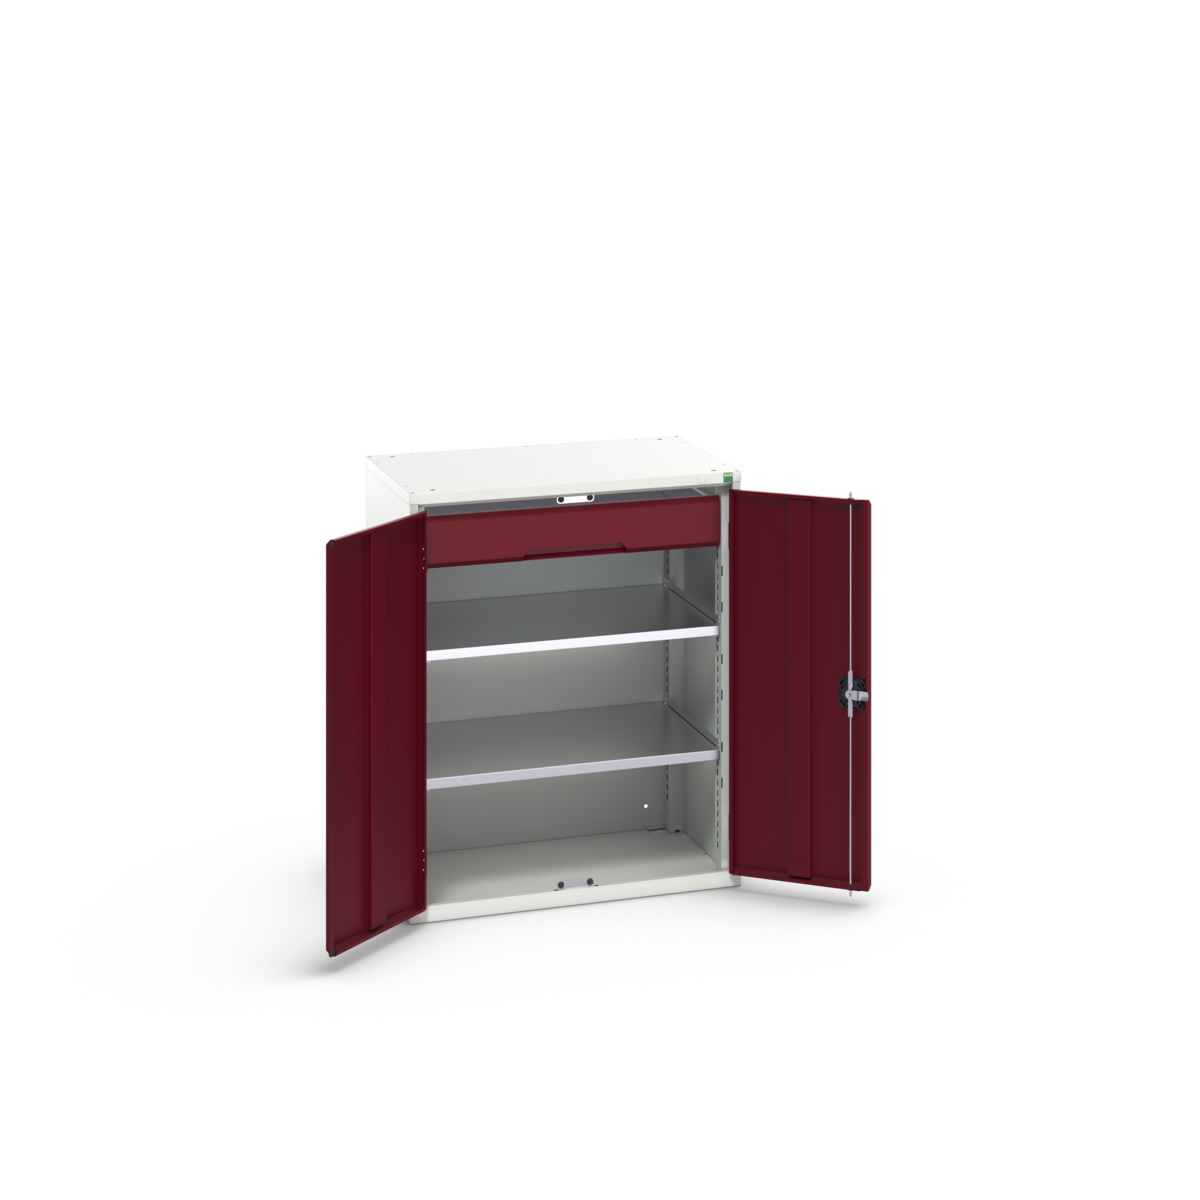 16926452.24 - verso kitted cupboard